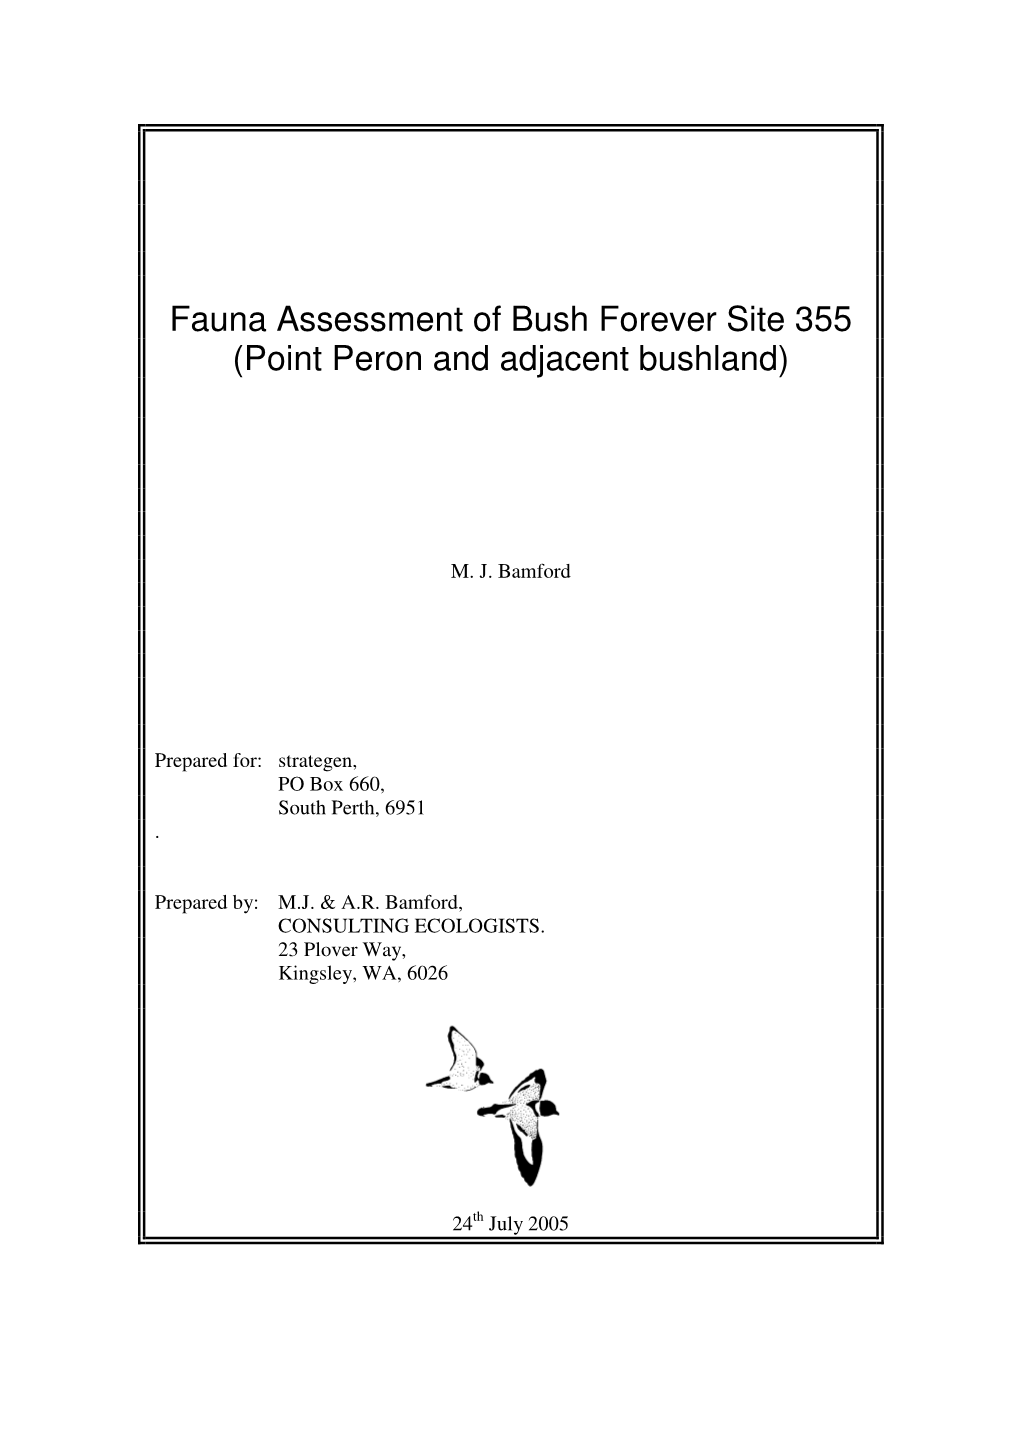 Fauna Assessment of Bush Forever Site 355 (Point Peron and Adjacent Bushland)